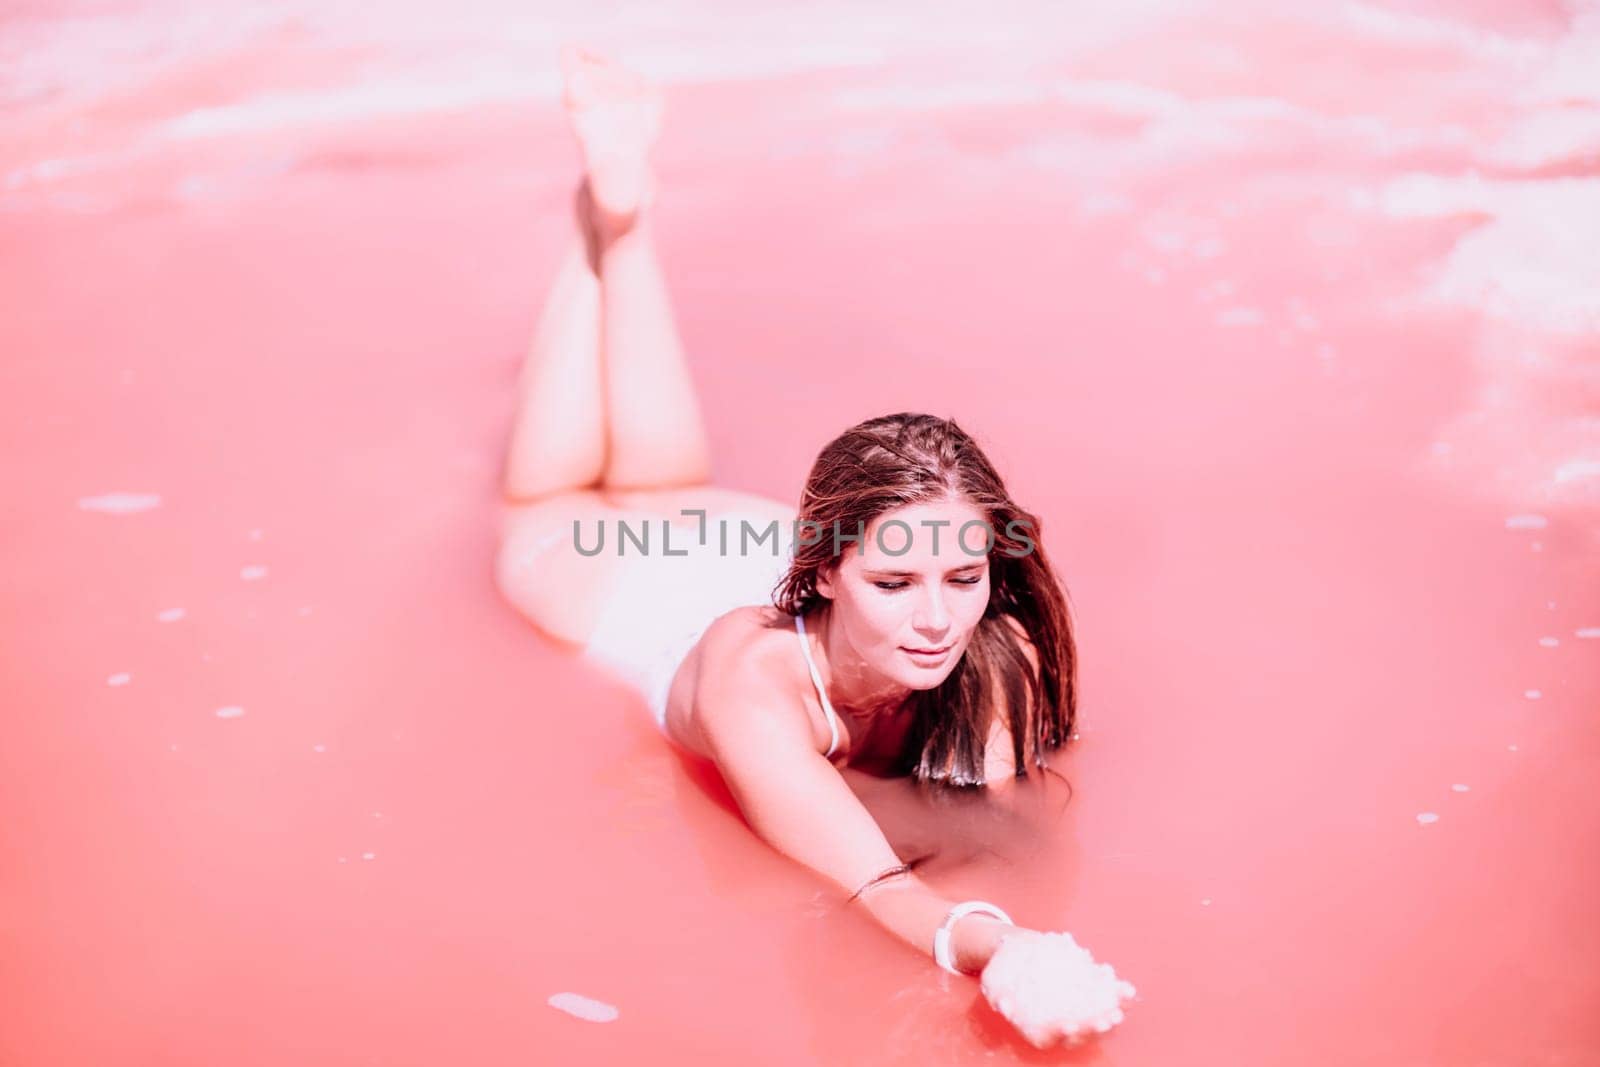 Woman in a pink salt lake. She lies in a white bathing suit. Wanderlust photo for memory by Matiunina